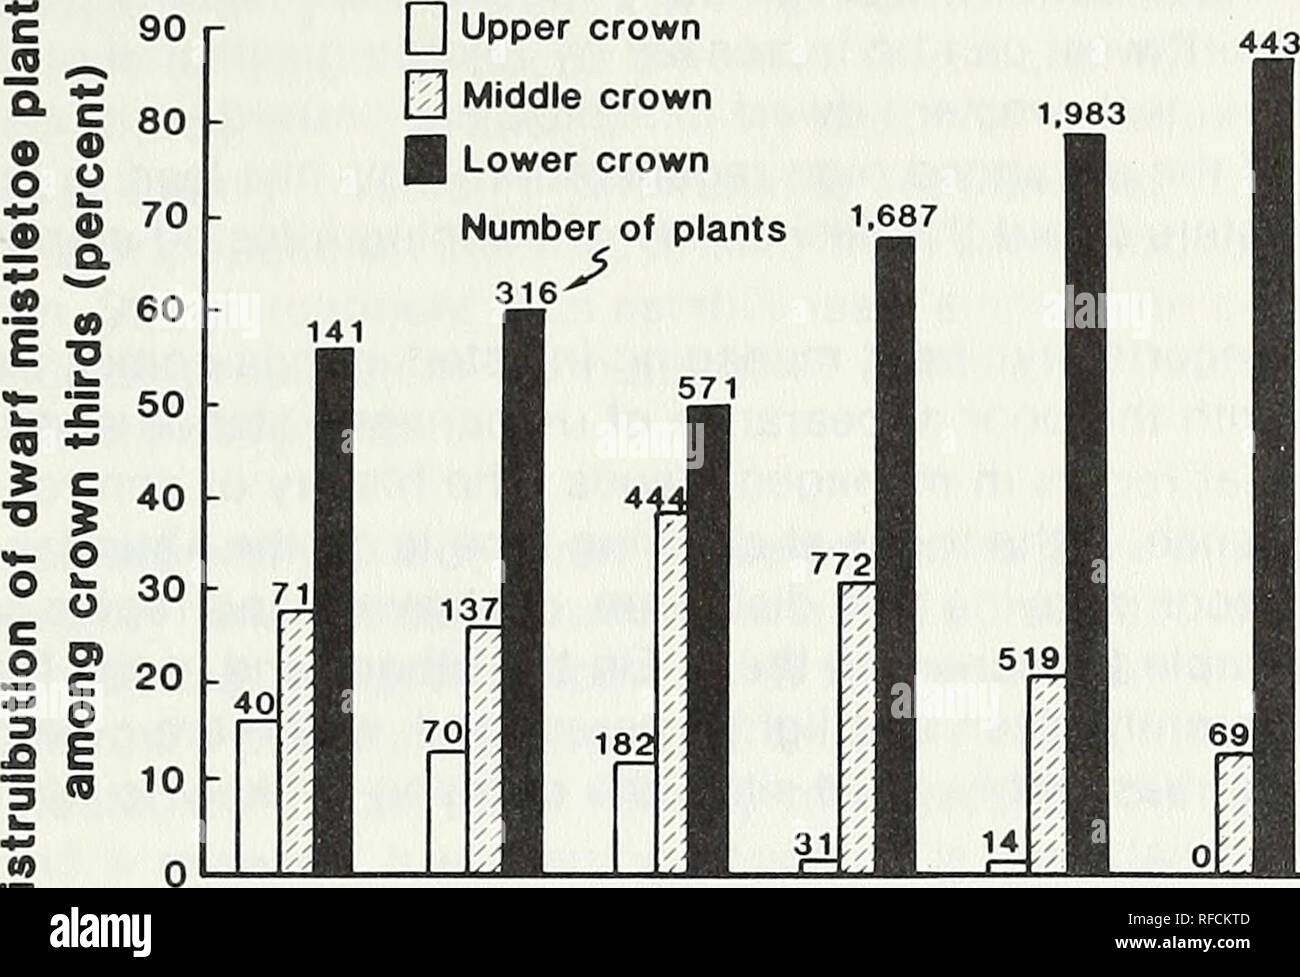 . Response of dwarf mistletoe-infested ponderosa pine to thinning. Arceuthobium Propagation; Ponderosa pine Diseases and pests; Ponderosa pine Thinning. (0. Q 1956 1960 1963 1968 1970 1974 Year Figure 6 —Distribution, among crown thirds, of the total dwarf mistletoe plants (7,440) growing on 54 young ponderosa pines between 1945 and 1974. Plant numbers are reported just pre- ceding stand release in 1956; when most latent dwarf mistle- toe plants had emerged after stand release in 1960; immedi- ately preceding accelerated leader elongation in 1963; when rapid leader growth had stabilized in 196 Stock Photo